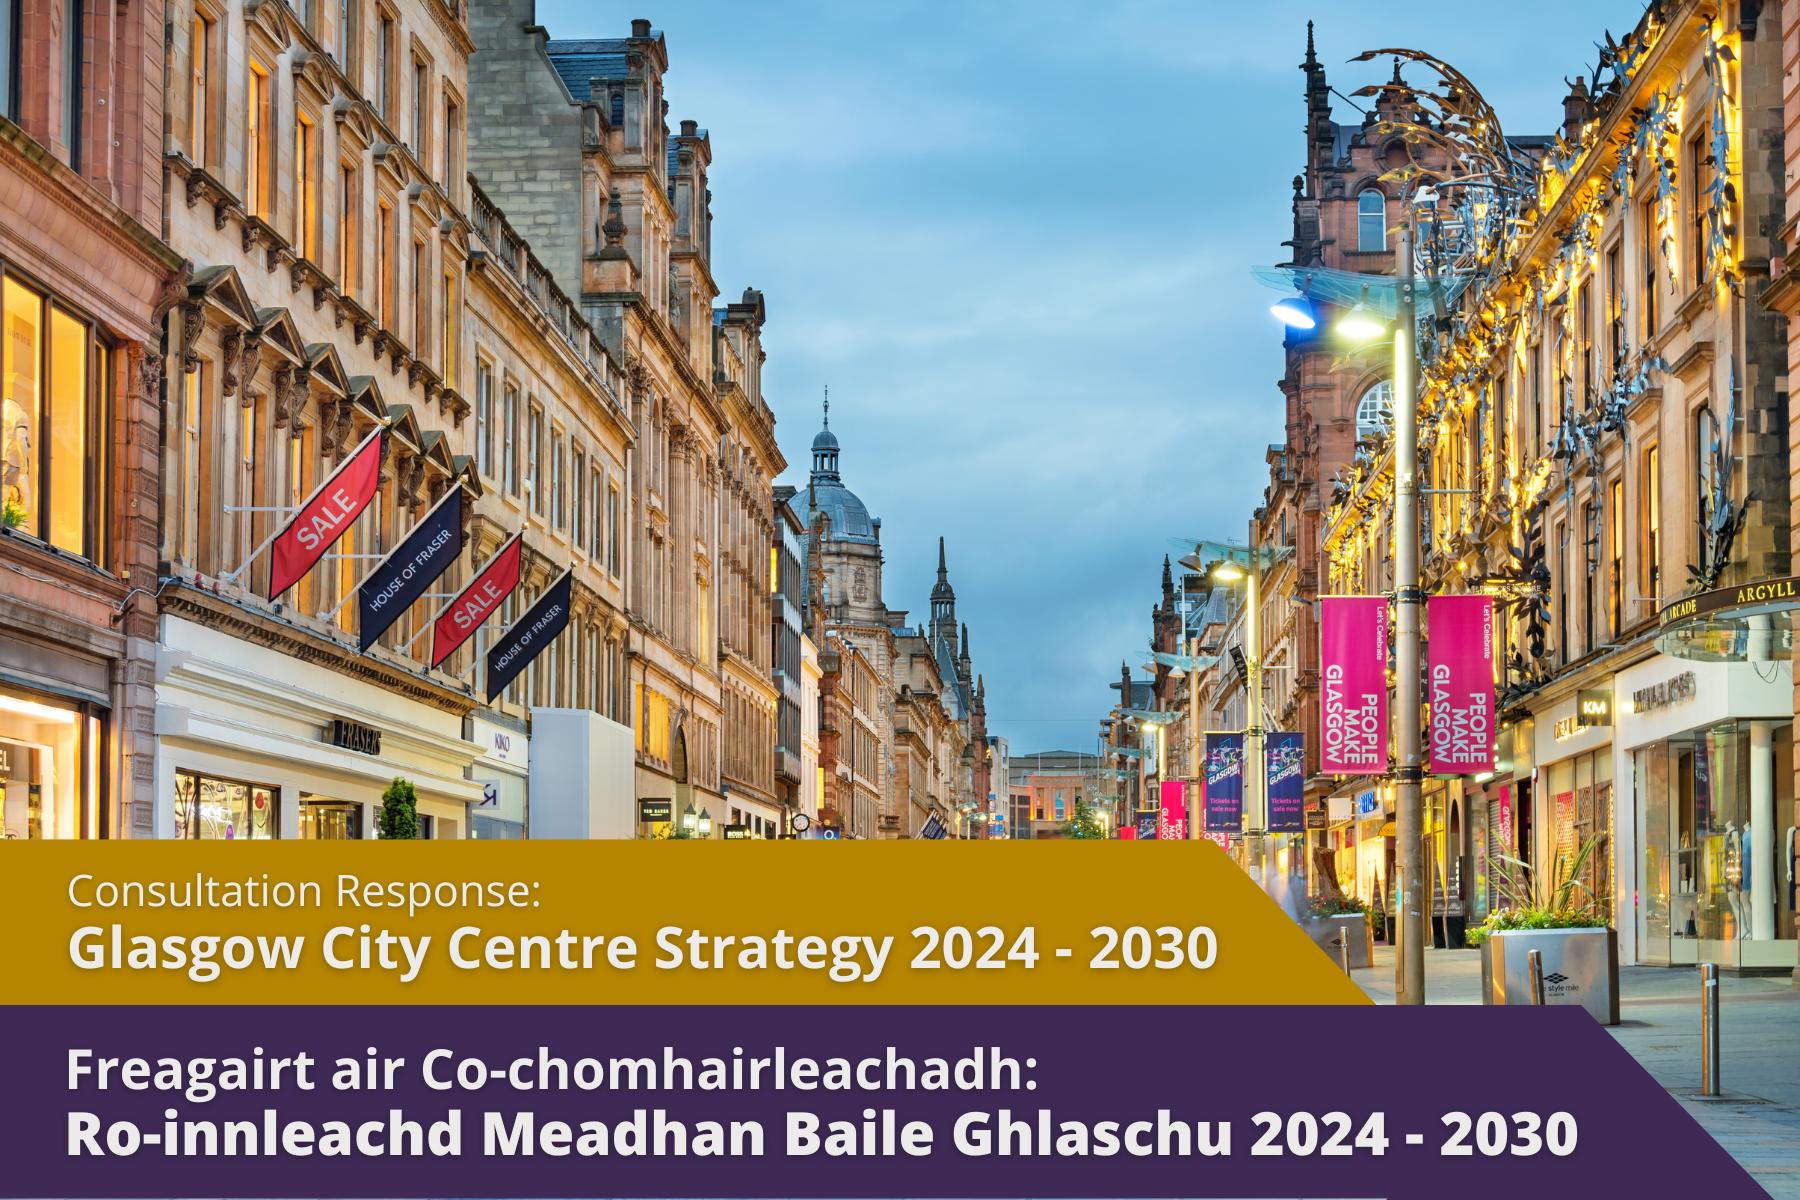 Picture: Buchanan Street in Glasgow lit up with text over picture. Text reads 'Consultation Response: Glasgow City Centre Strategy 2024 – 2030'